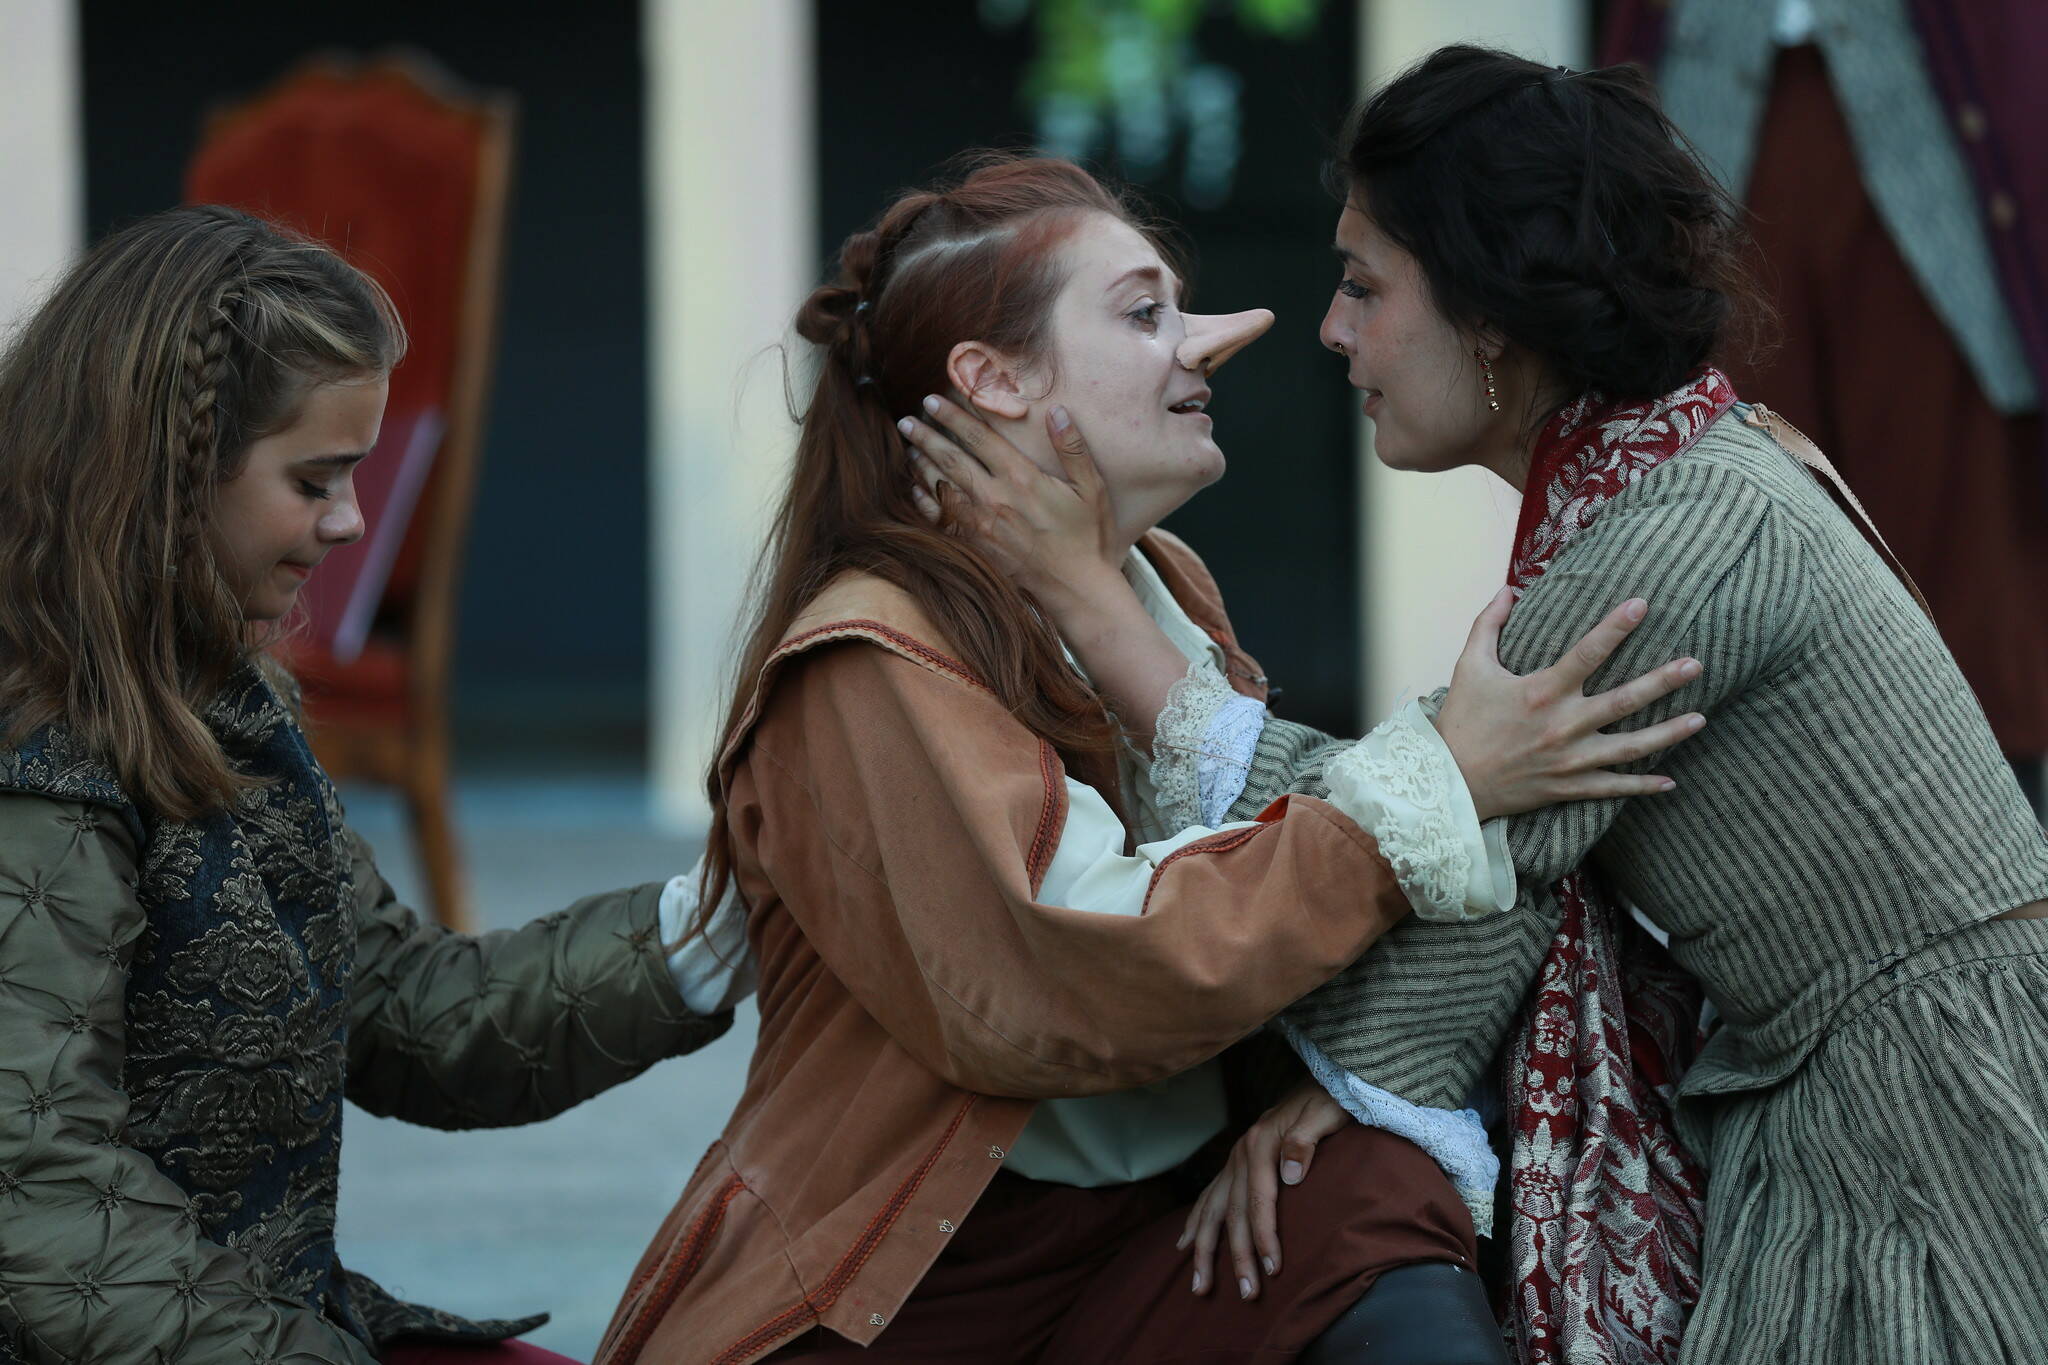 Photo by Michael Stadler
From left to right, Abigail Rhyne as Le Bret, Helen Roundhill as Cyrano and Mary Reagan as Roxane in “Cyrano de Bergerac: A Queeroic Comedy with Many Acts.”